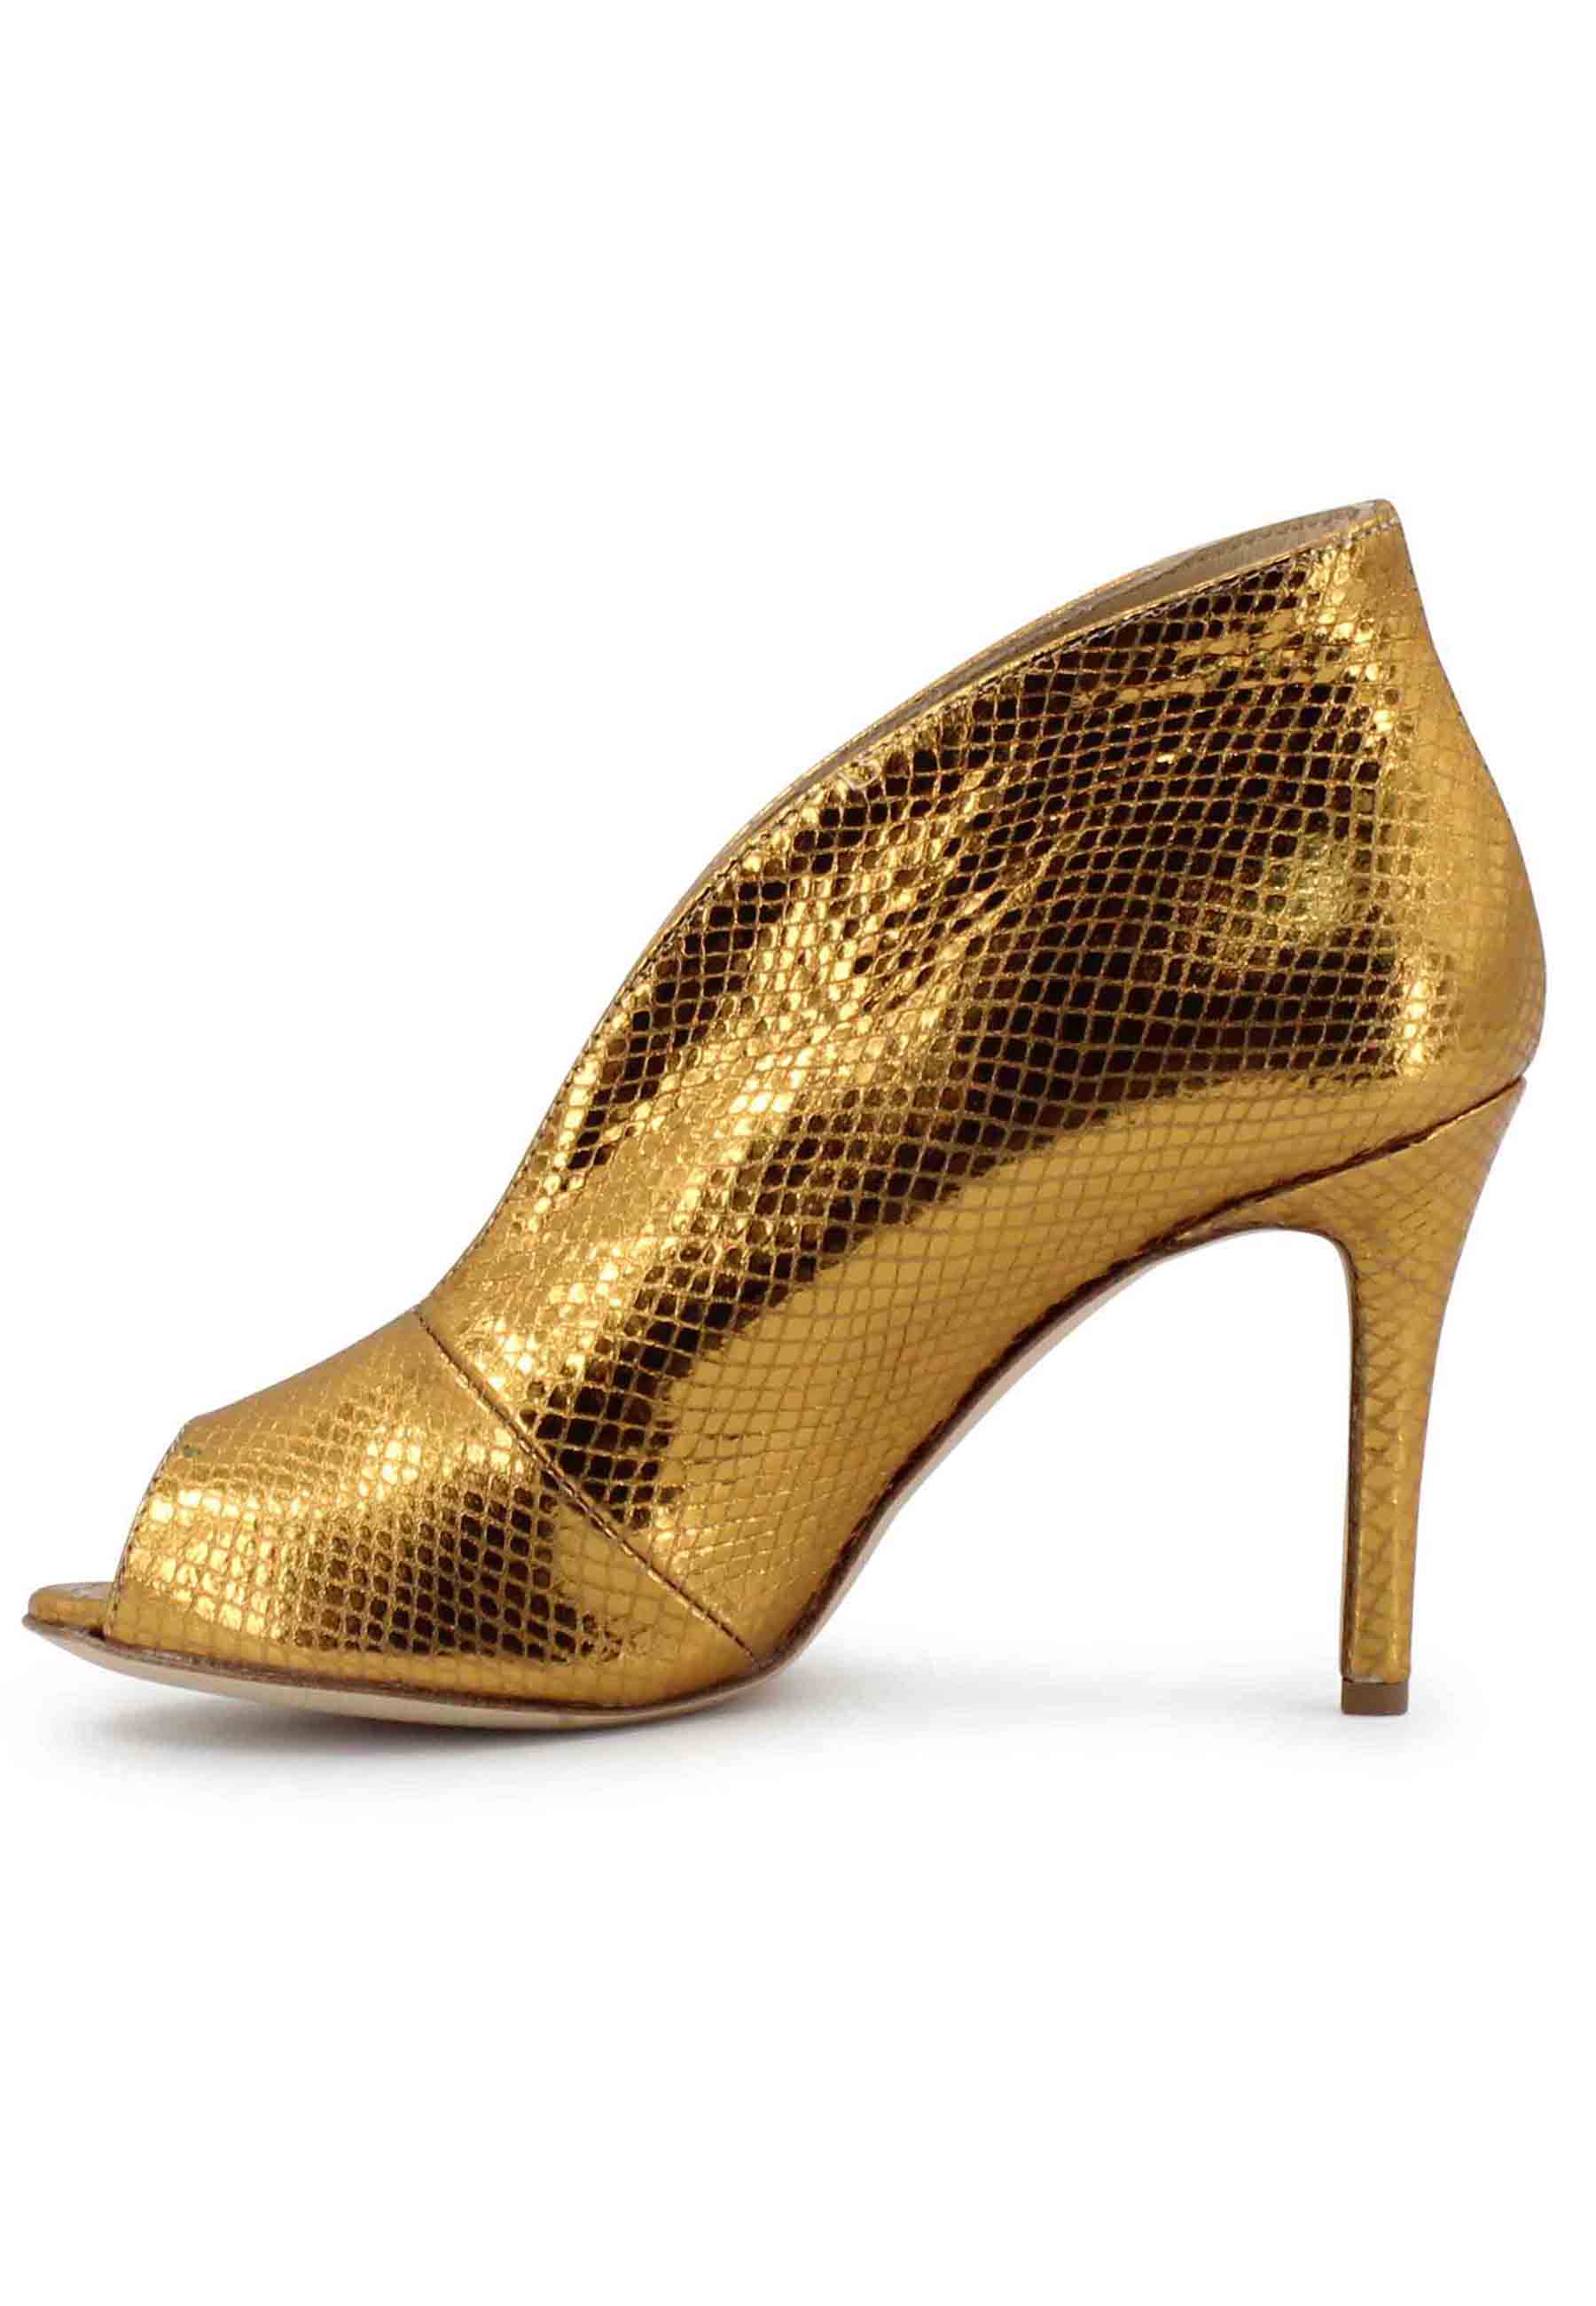 Women's open toe ankle boots in gold laminated leather with high heel